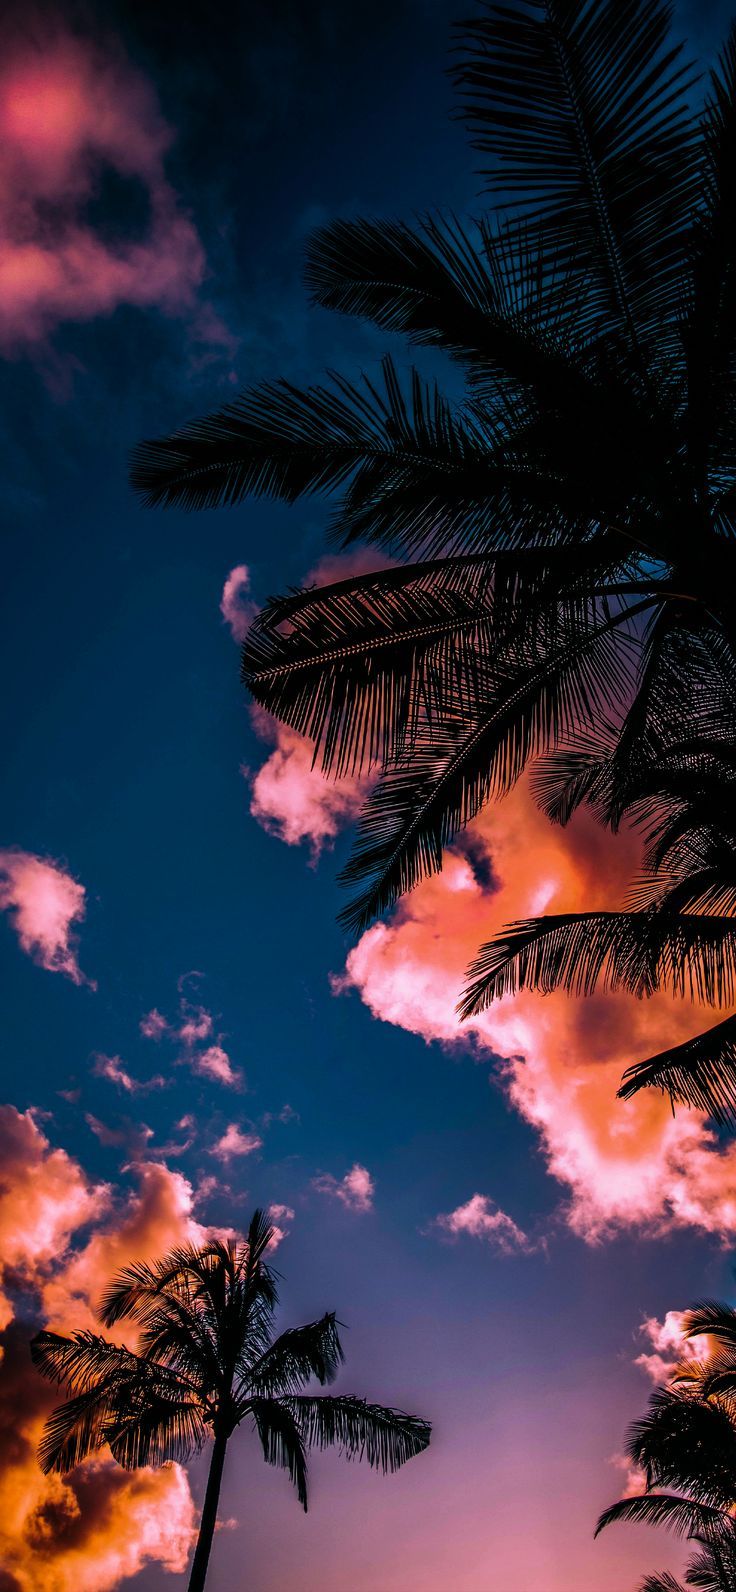 A sunset with palm trees and clouds - Miami